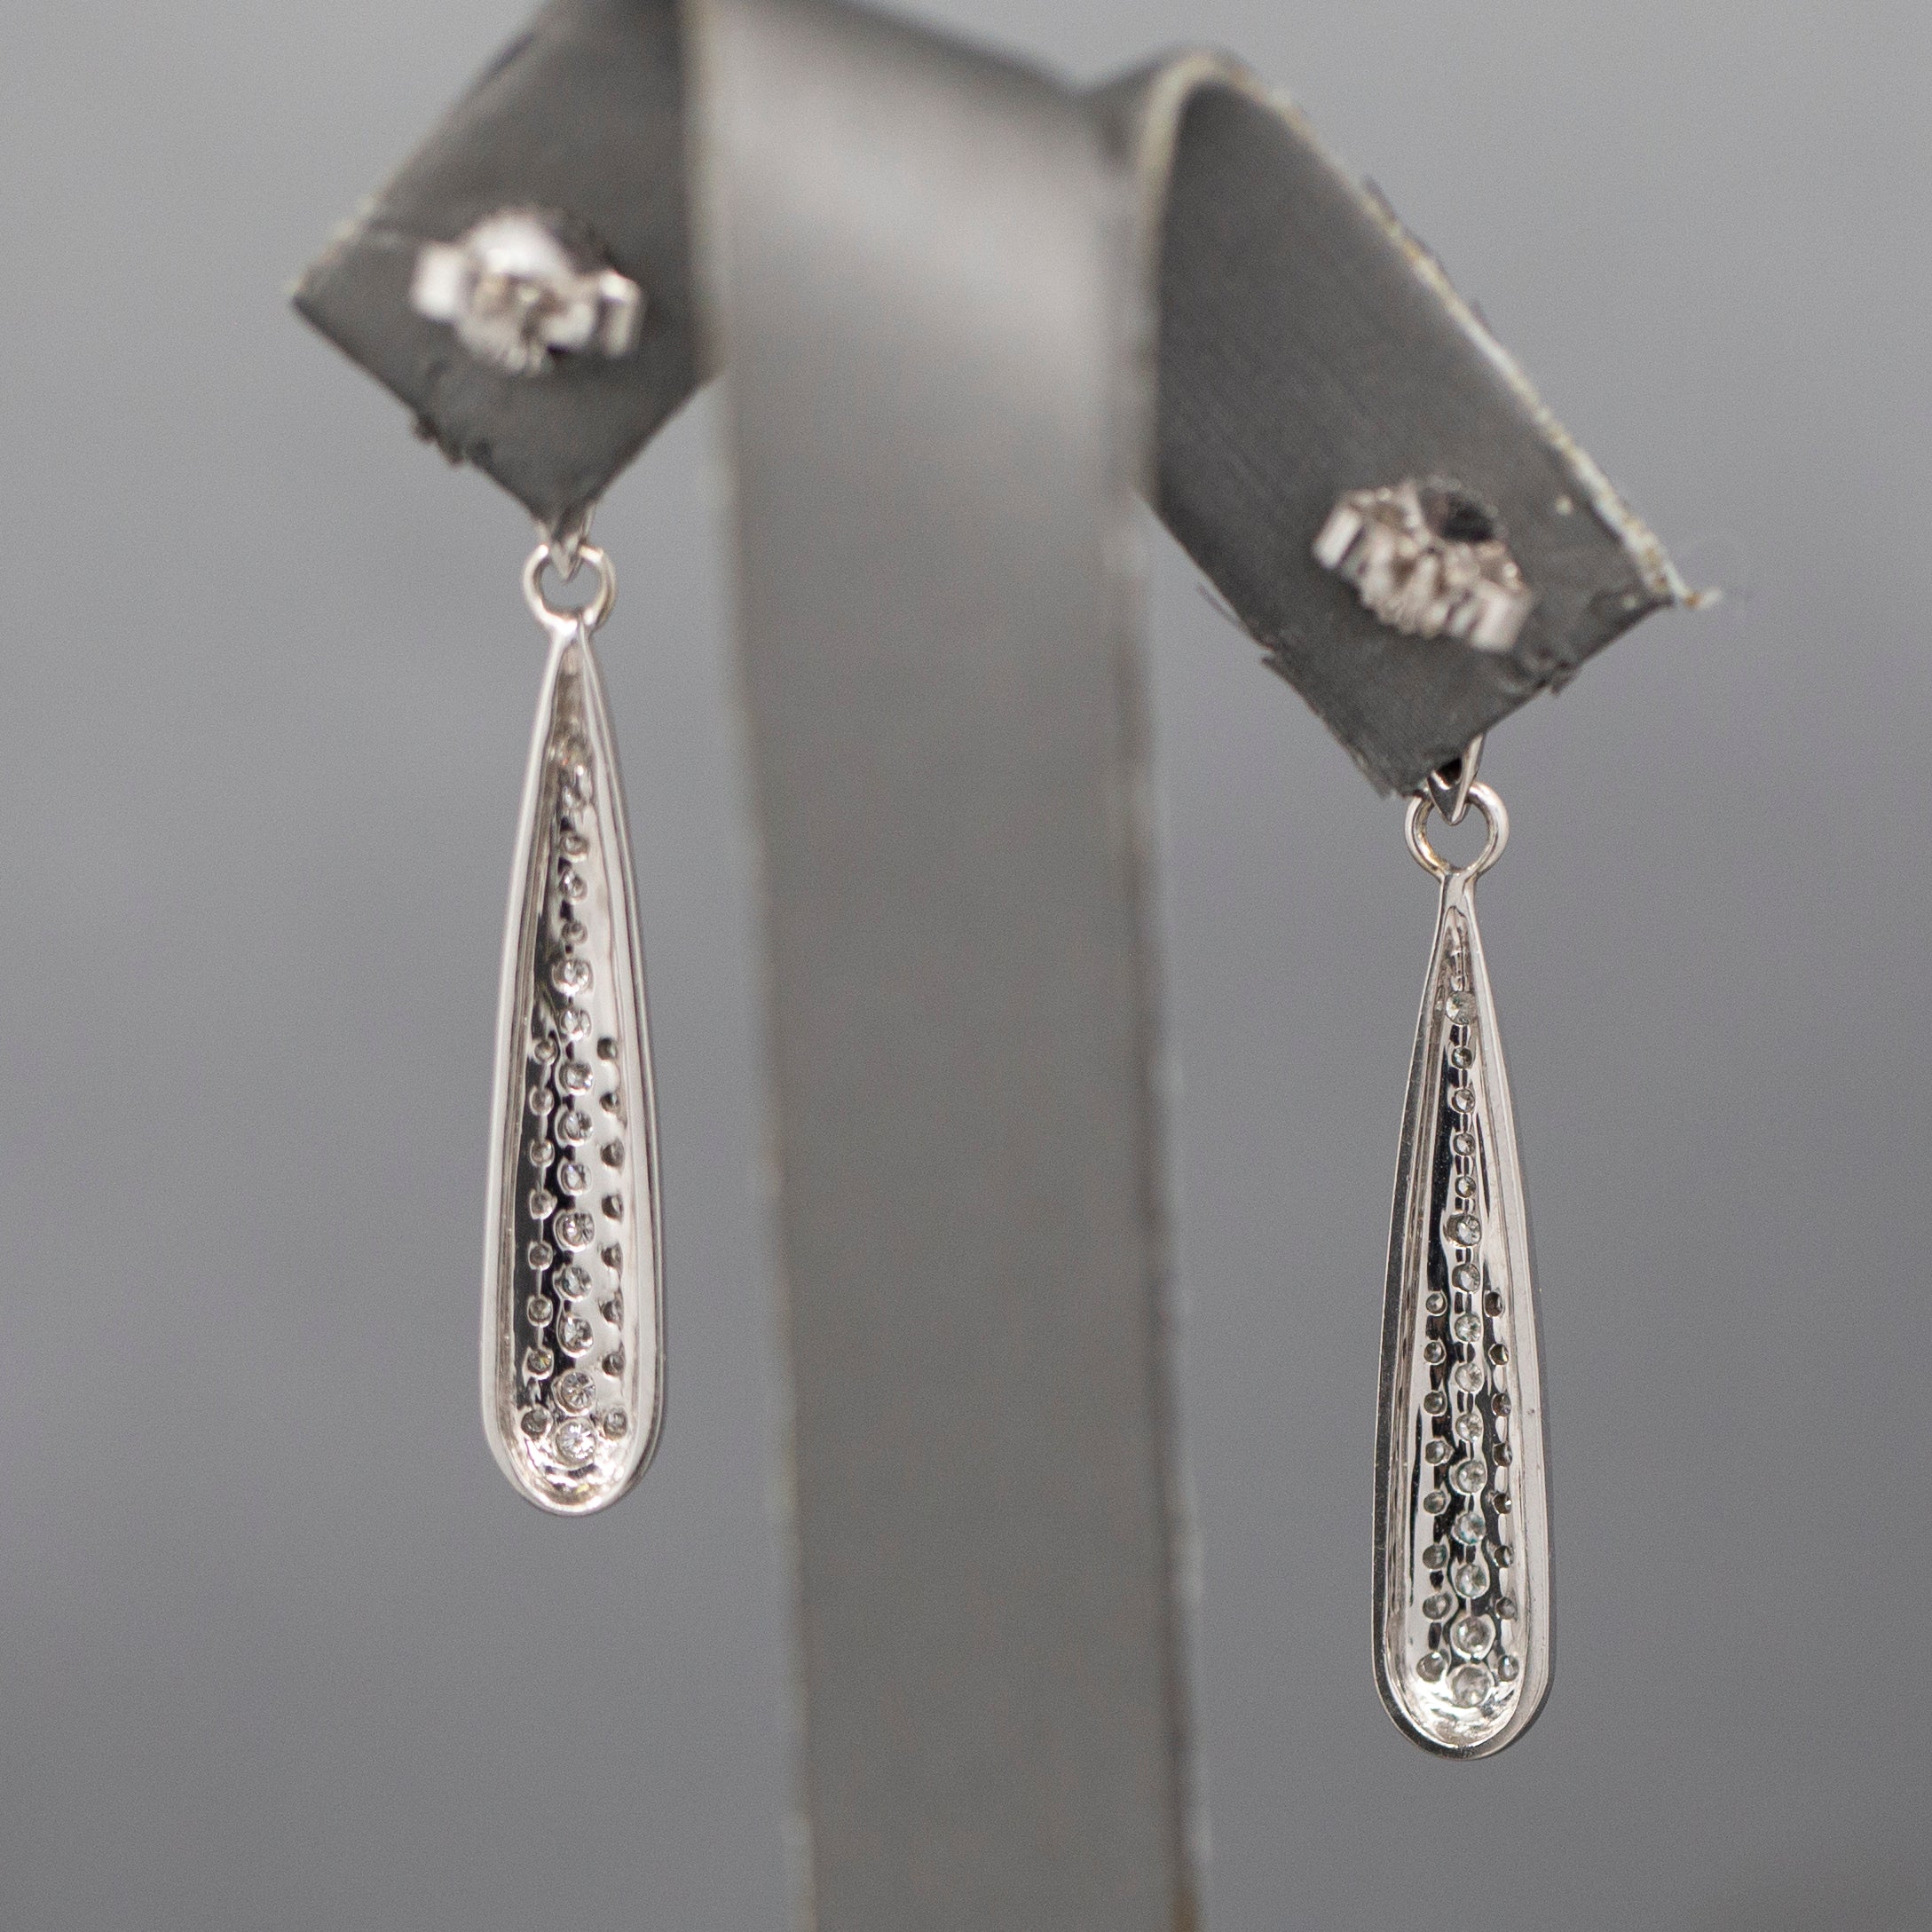 Sparkly Elongated Teardrop Pave' Set Diamond Earrings in 14k White Gold